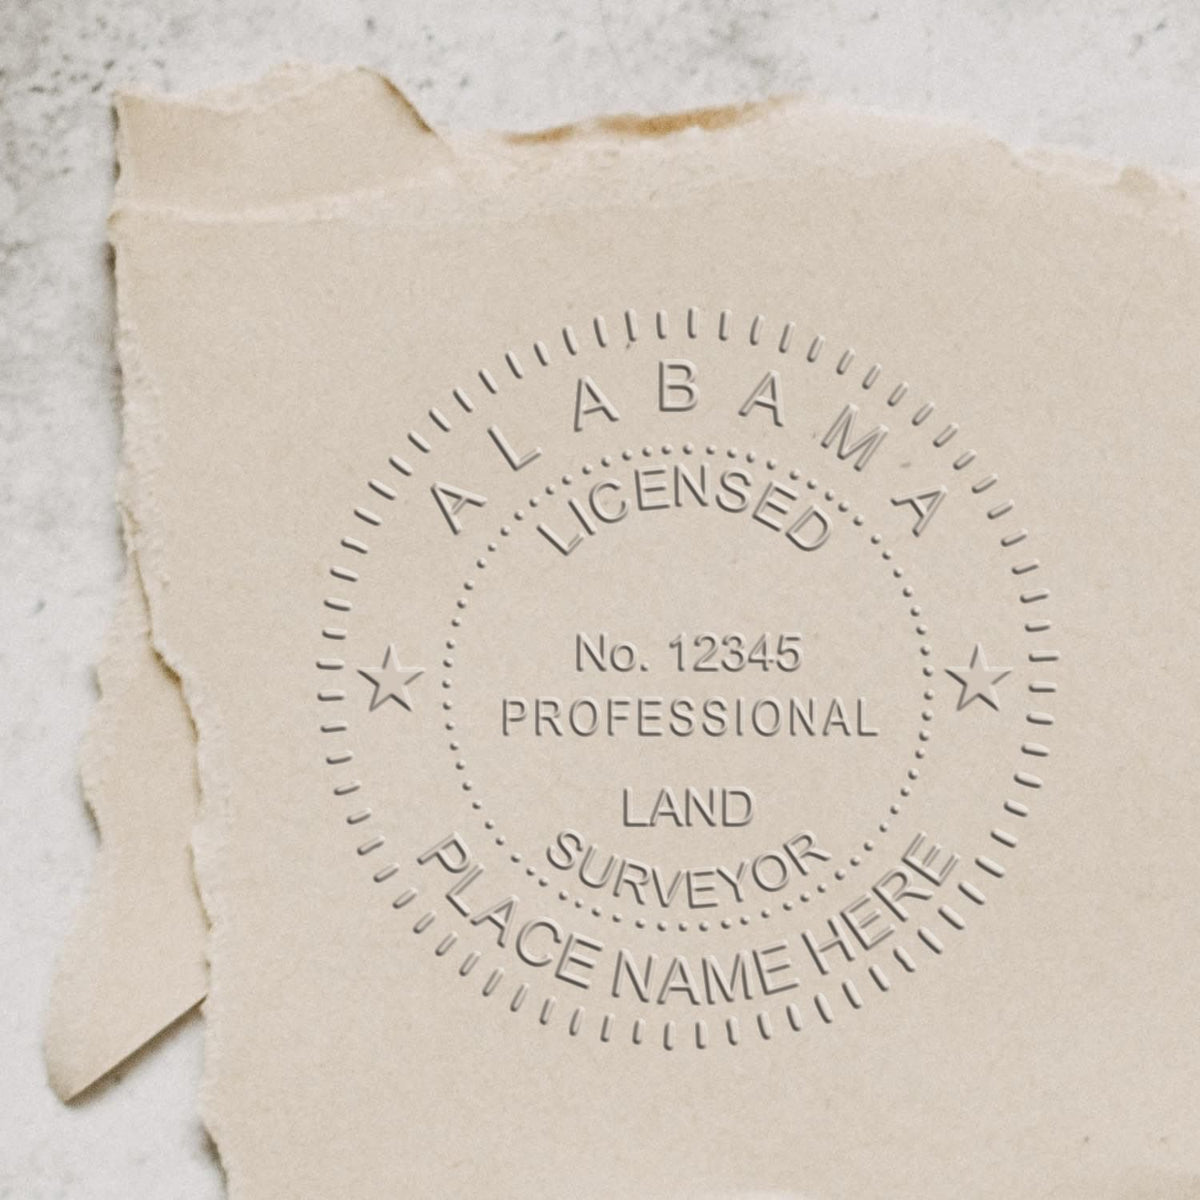 A stamped impression of the Handheld Alabama Land Surveyor Seal in this stylish lifestyle photo, setting the tone for a unique and personalized product.